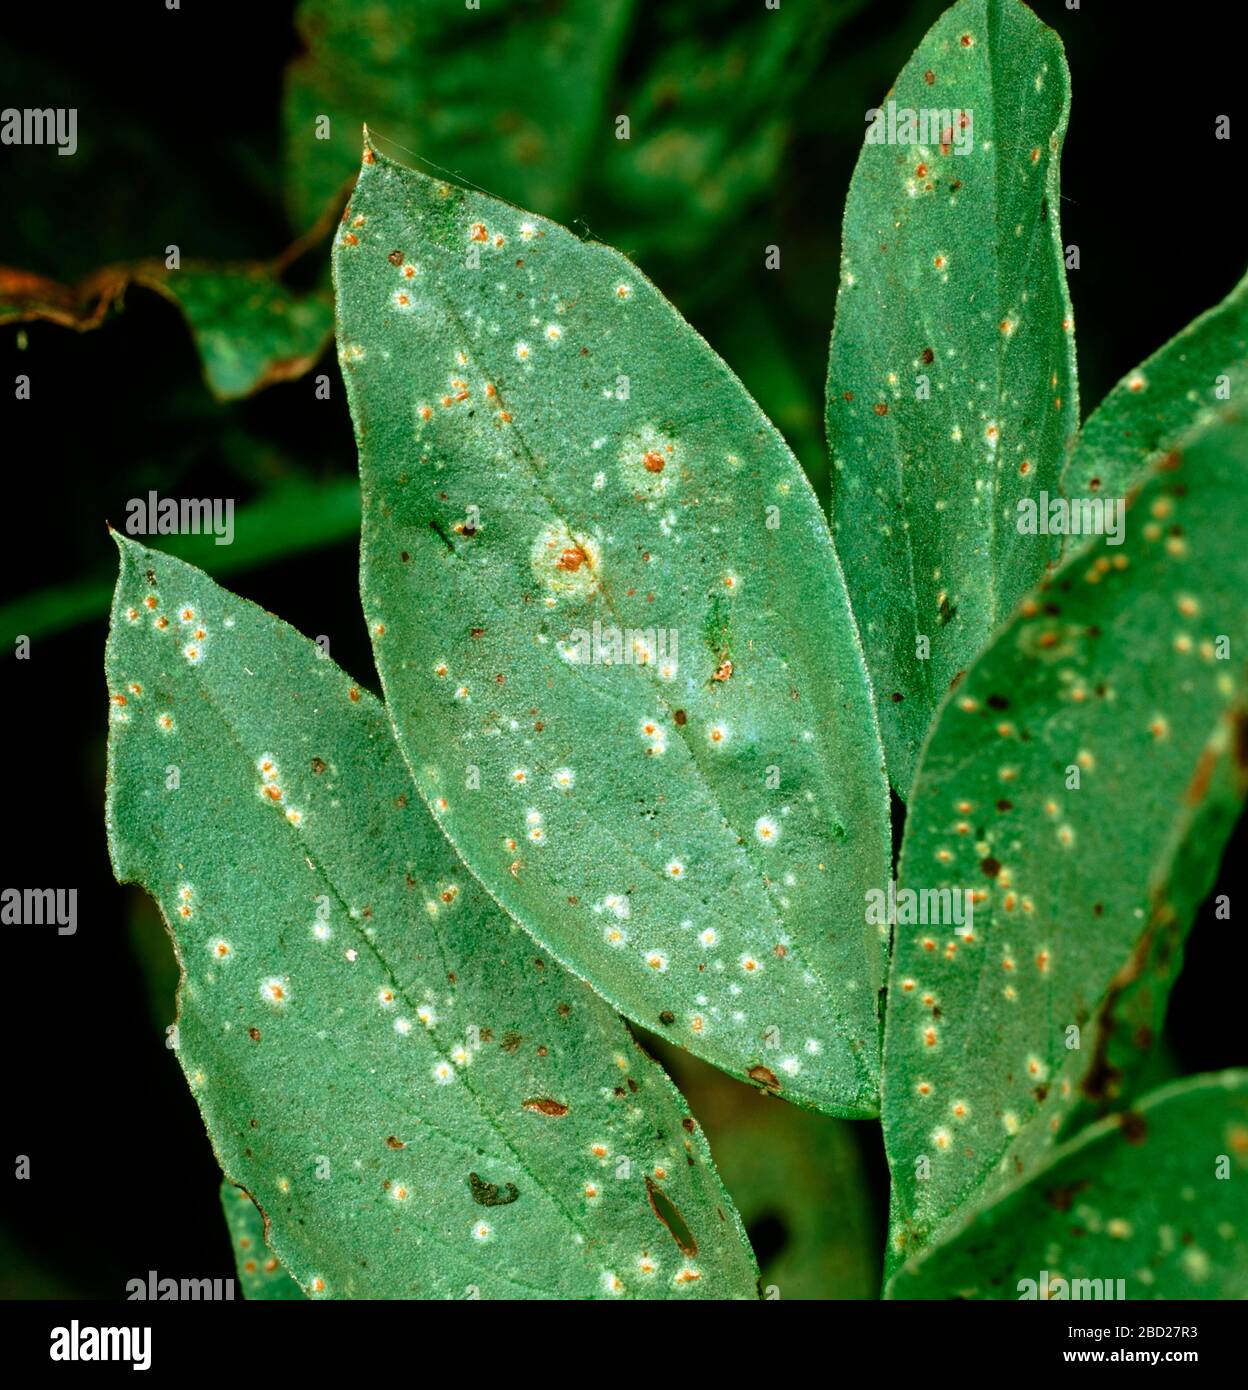 Early infection and discreet  pustules of broad bean or faba-bean rust (Uromyces viciae-fabae) on a bean leaf Stock Photo